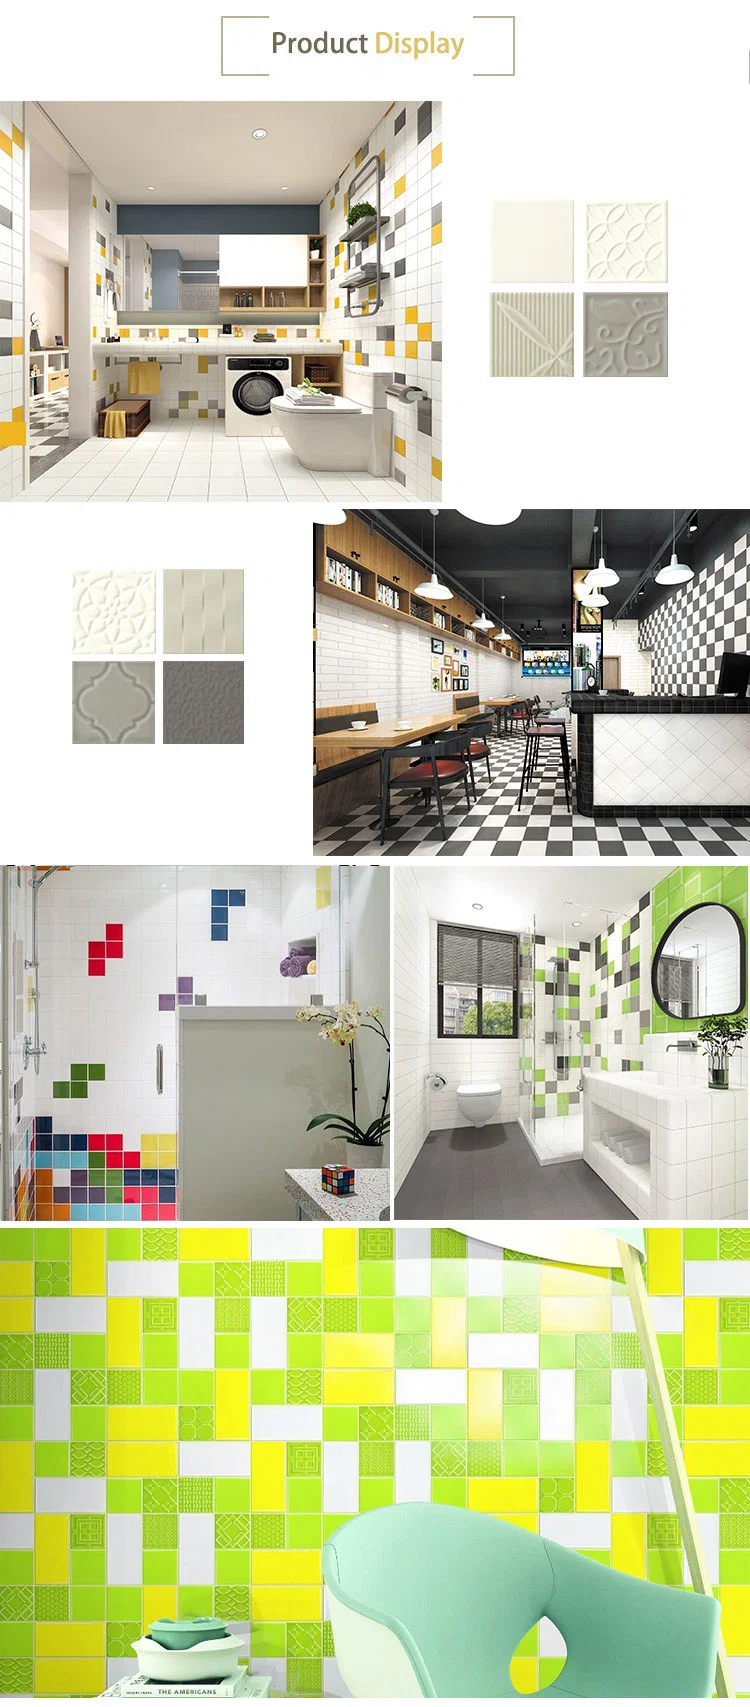 100X100mm Red/White/Grey/Black Color Wall Tiles Bathroom